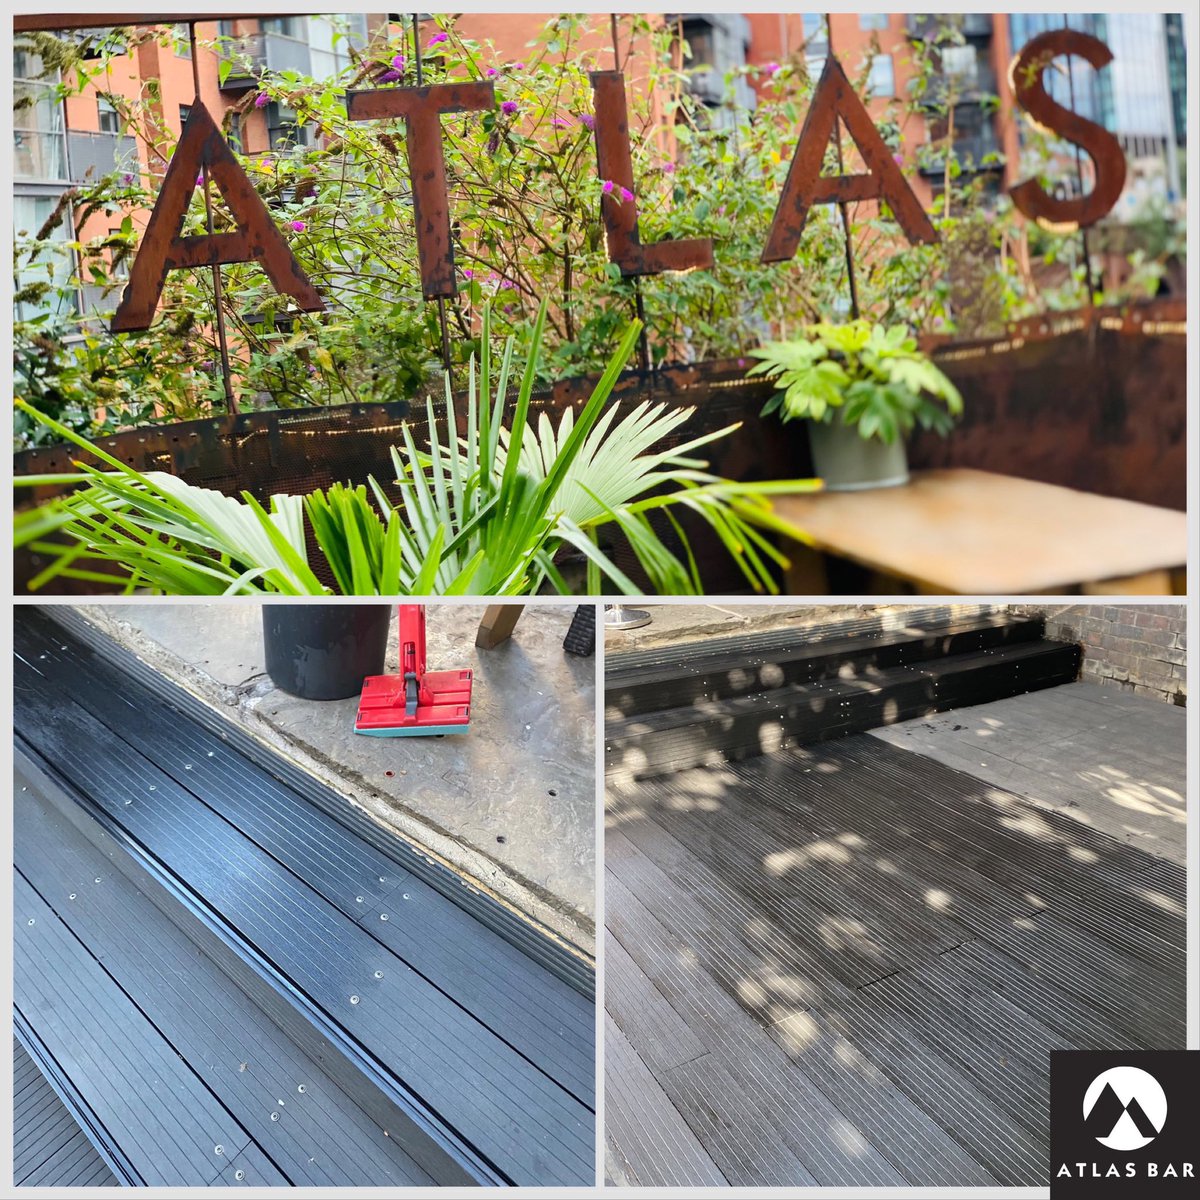 Finally… Some better weather to spruce up our terrace. Spring is getting nearer, Manchester.